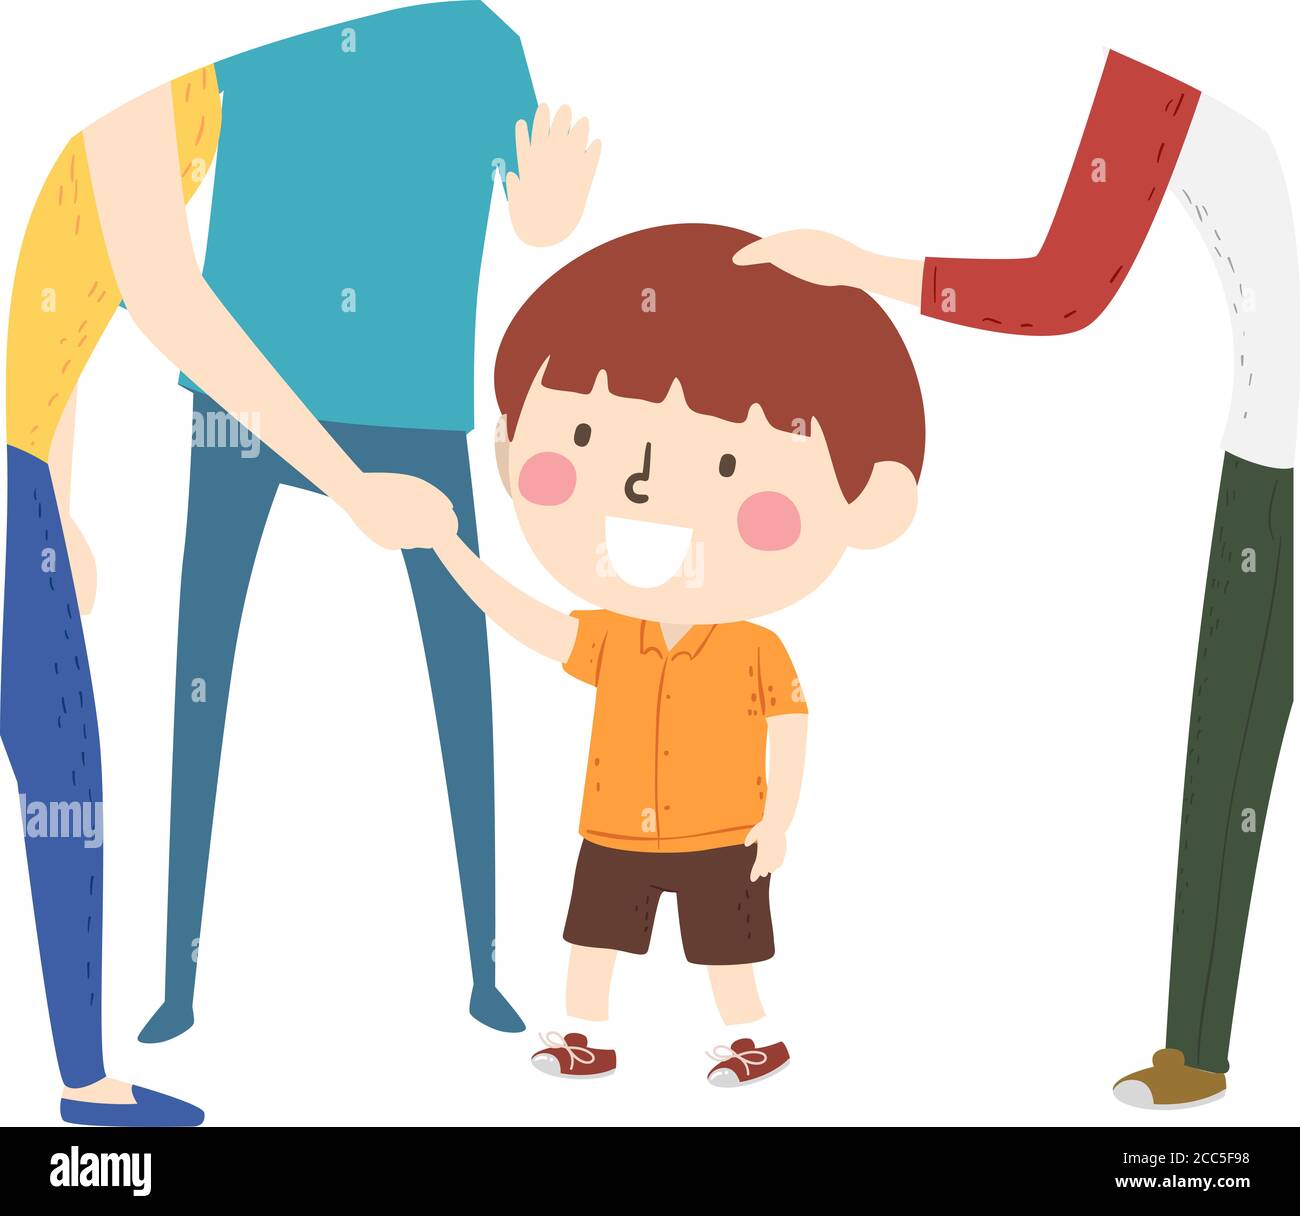 Illustration of a Kid Boy Holding Hand of an Adult, Having Conversation with Older People Stock Photo